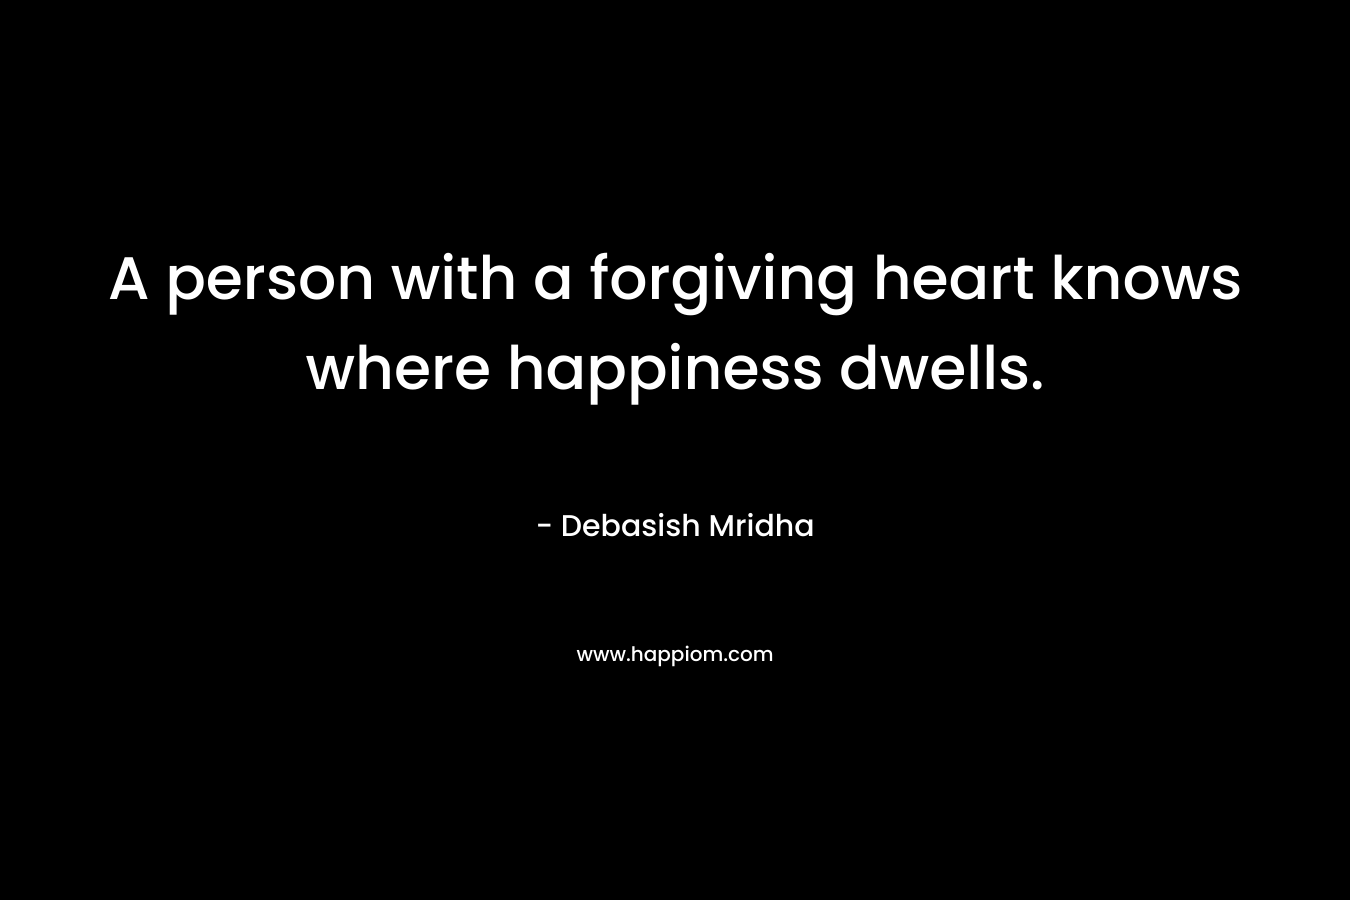 A person with a forgiving heart knows where happiness dwells. – Debasish Mridha